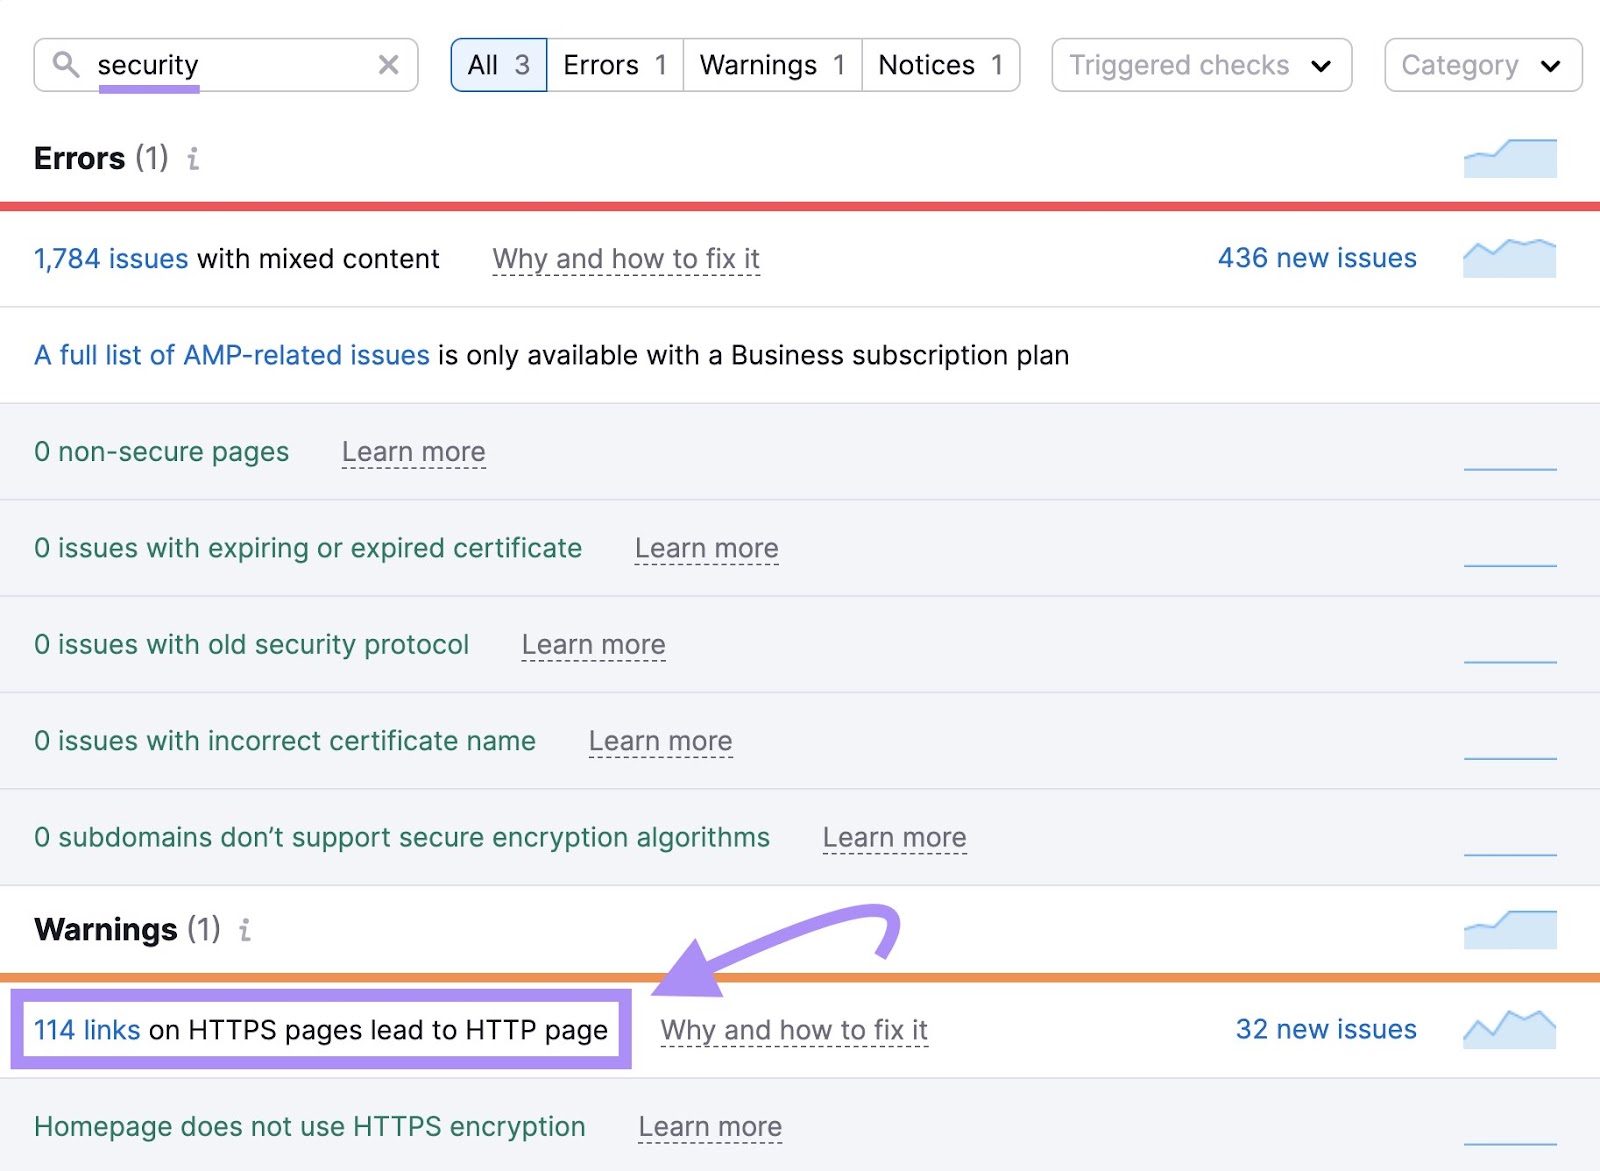 "114 links connected  HTTPS pages pb  to HTTP page" effect   highlighted nether  "Warnings" conception  successful  Site Audit